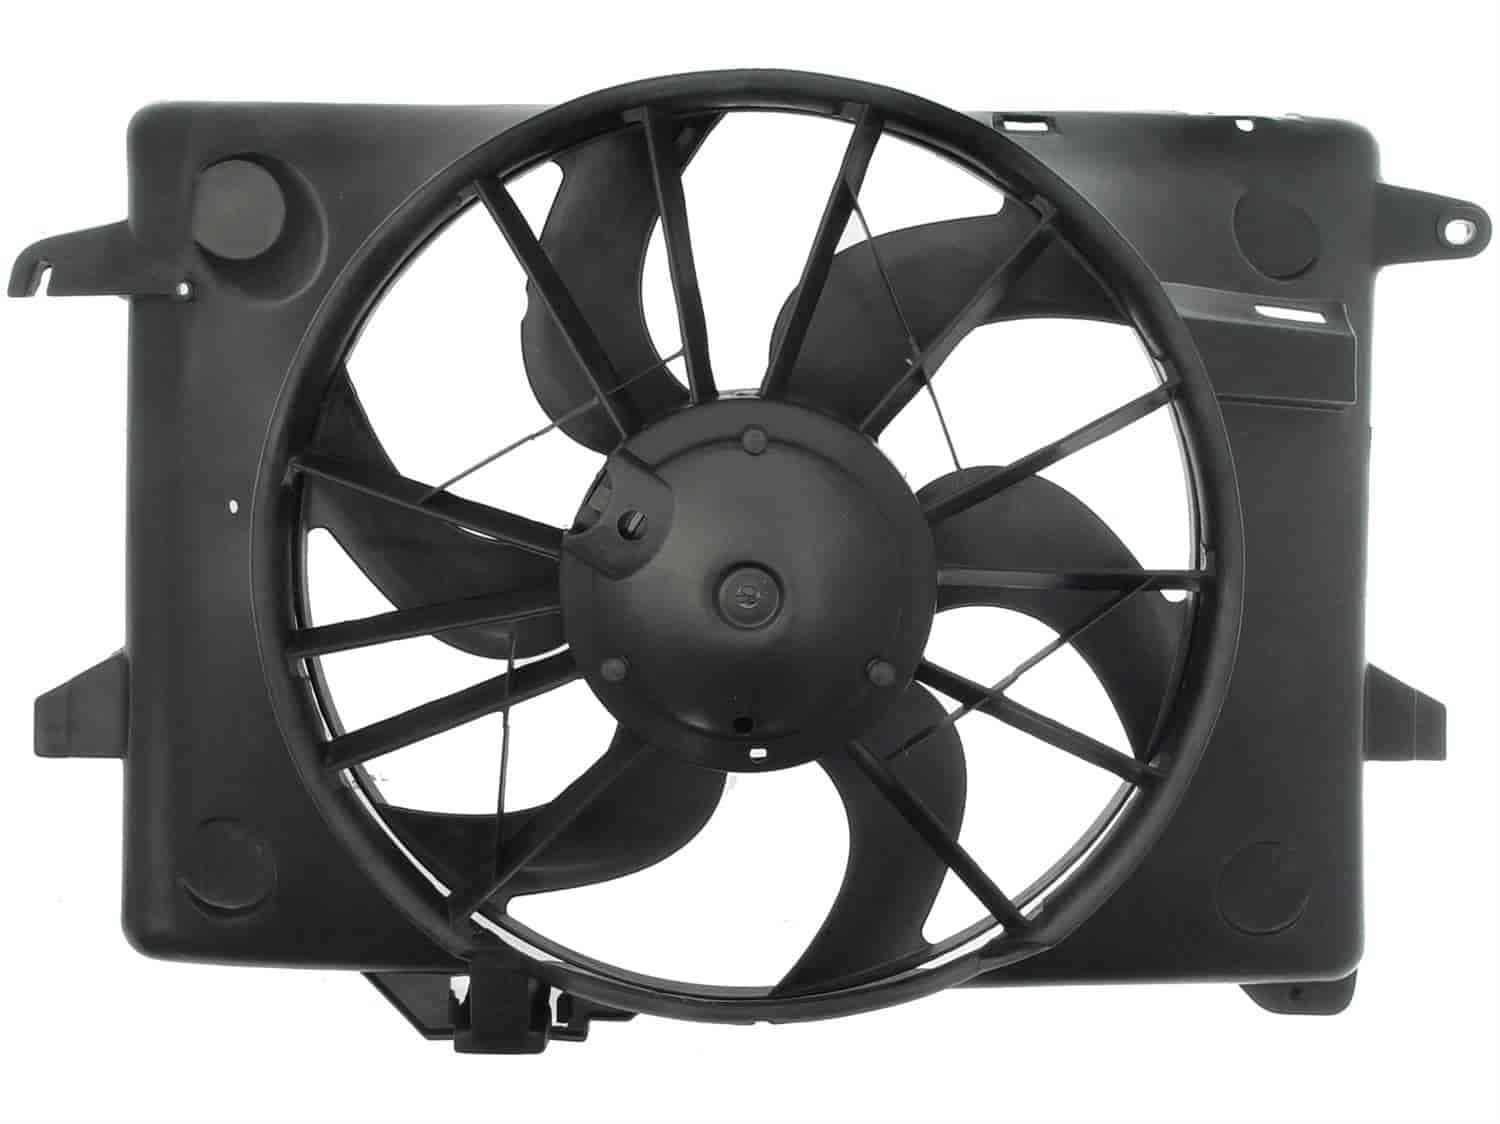 620-108 Radiator Fan Assembly for 1998-2000 Ford Crown